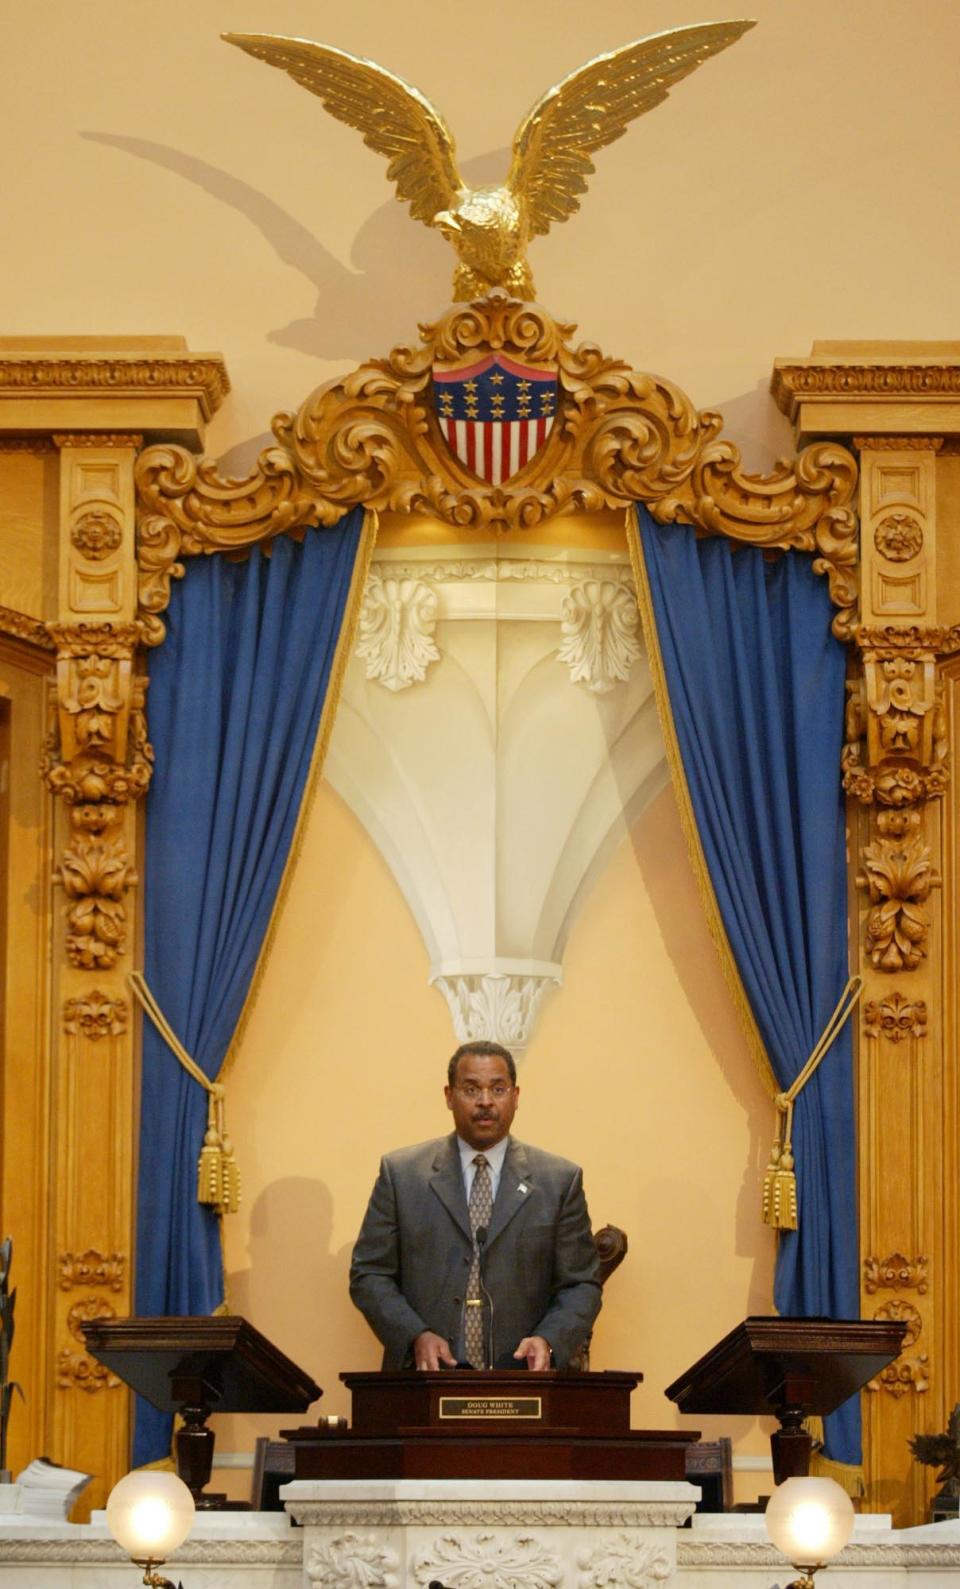 Secretary of State J. Kenneth Blackwell presides over Ohio's electoral college during the voting ceremony at the Statehouse in Columbus, Ohio on Dec. 13, 2004.